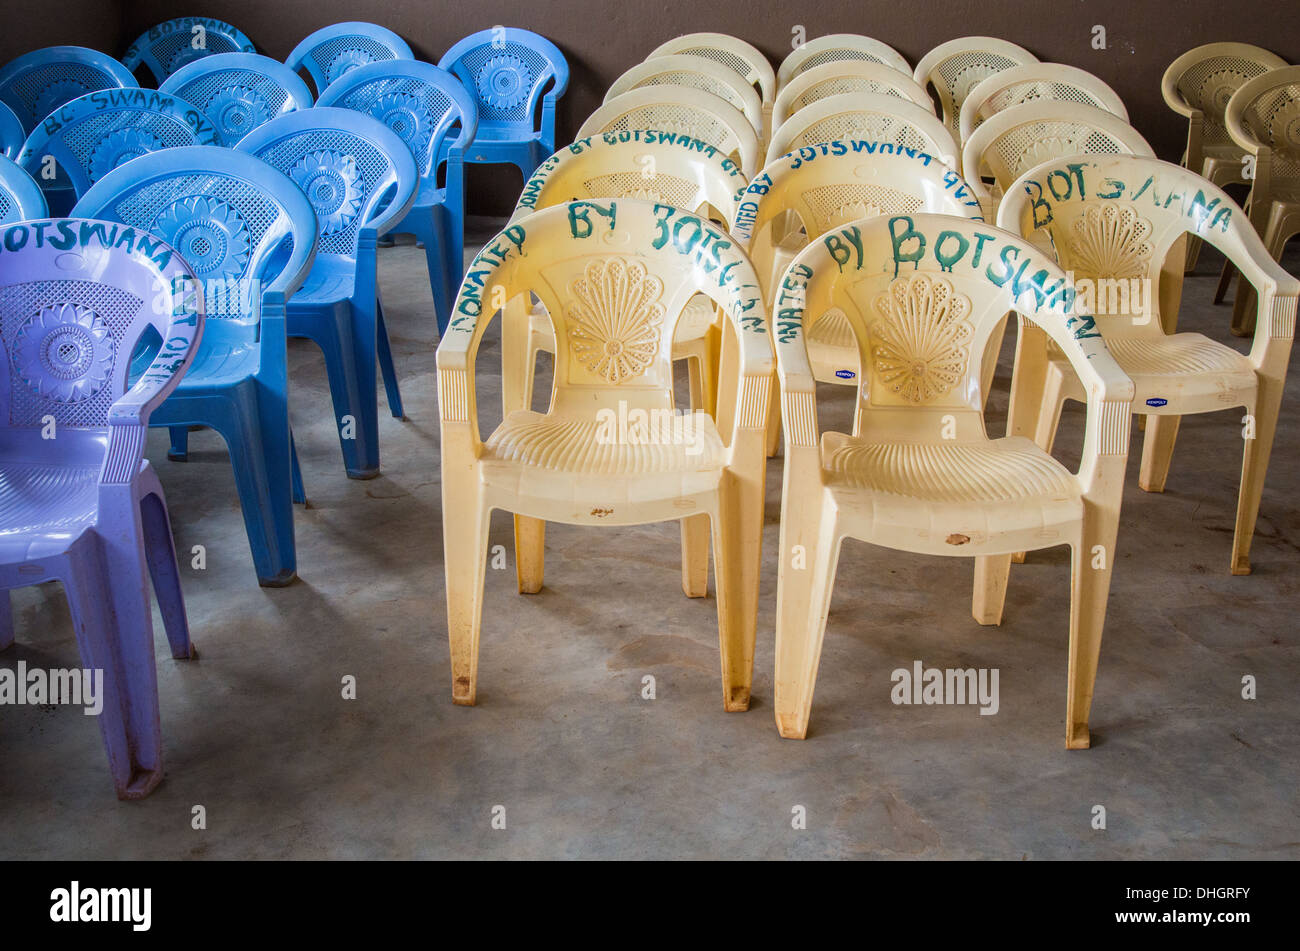 Plastic garden chairs donated by Botswana in a Kenyan primary school hall Stock Photo